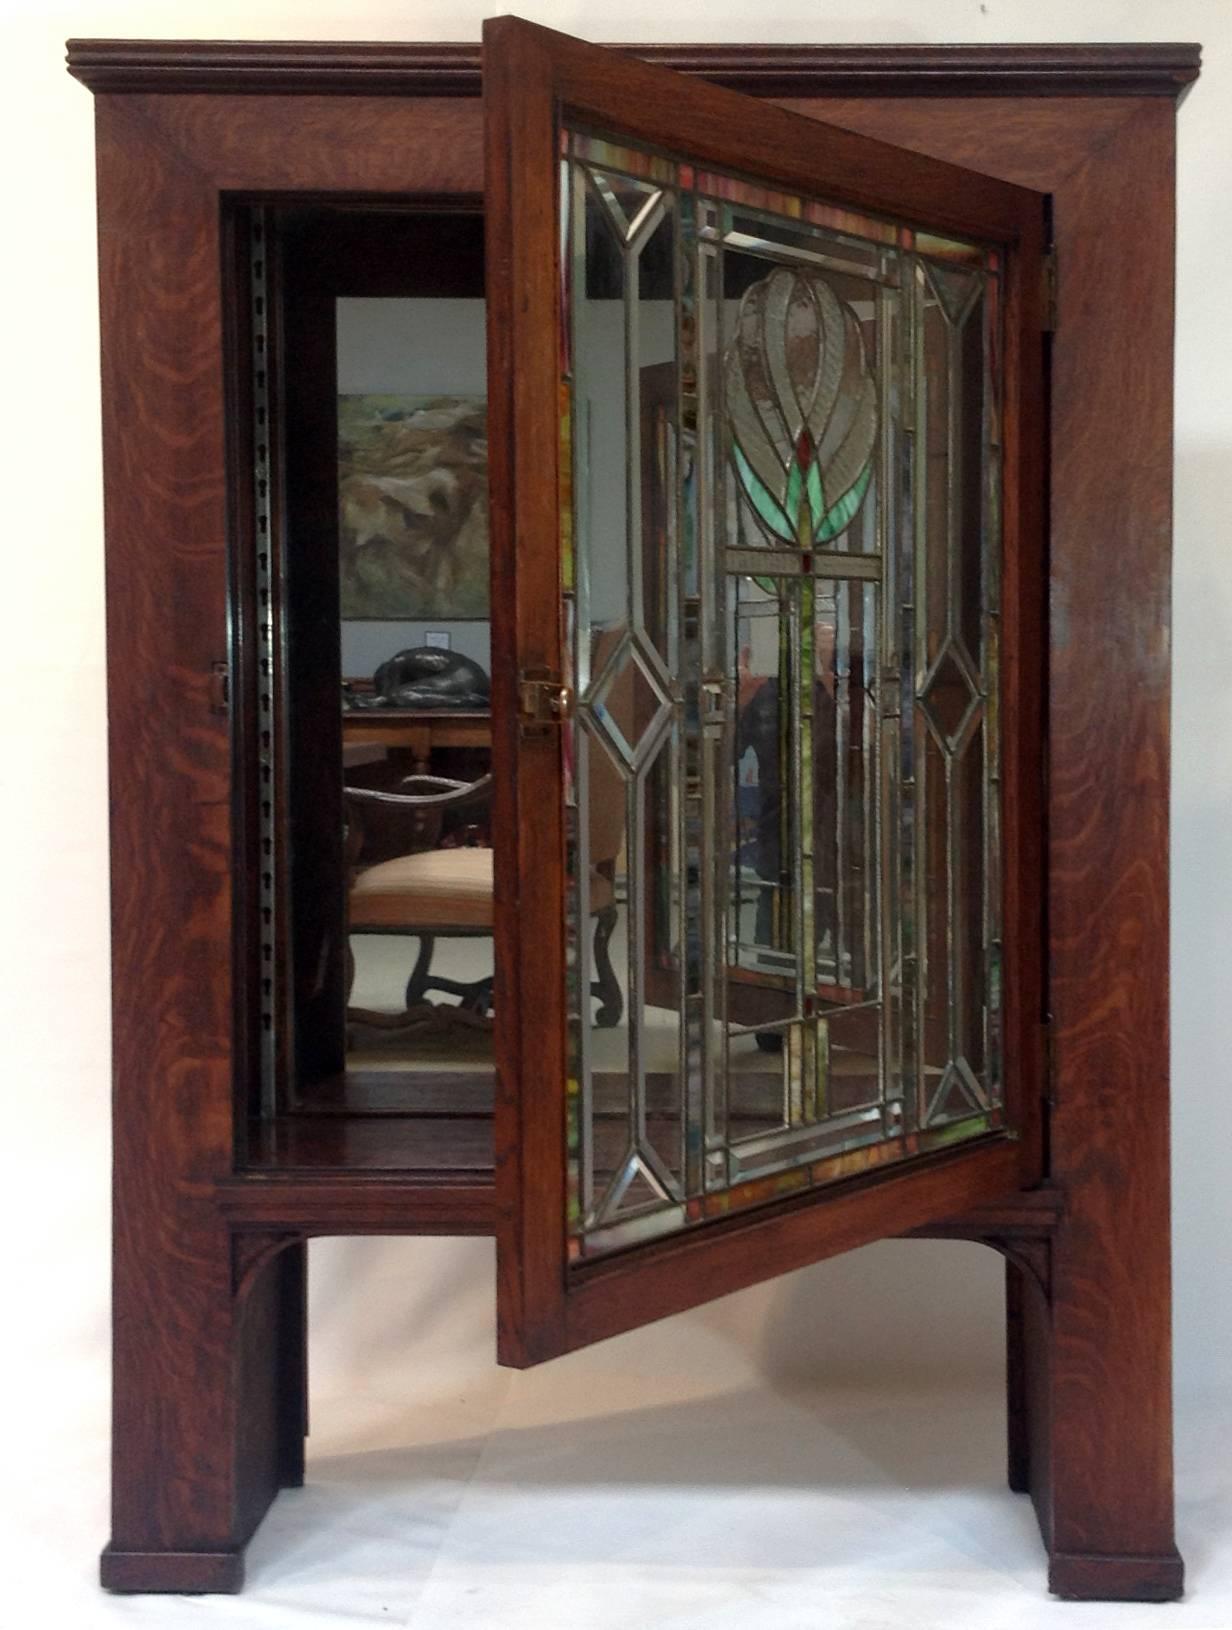 Large, antique quarter-sawn oak cabinet with a beautiful stained glass door. Classic style and proportions. Mirror inside added at later time. Is set up to accept shelving.